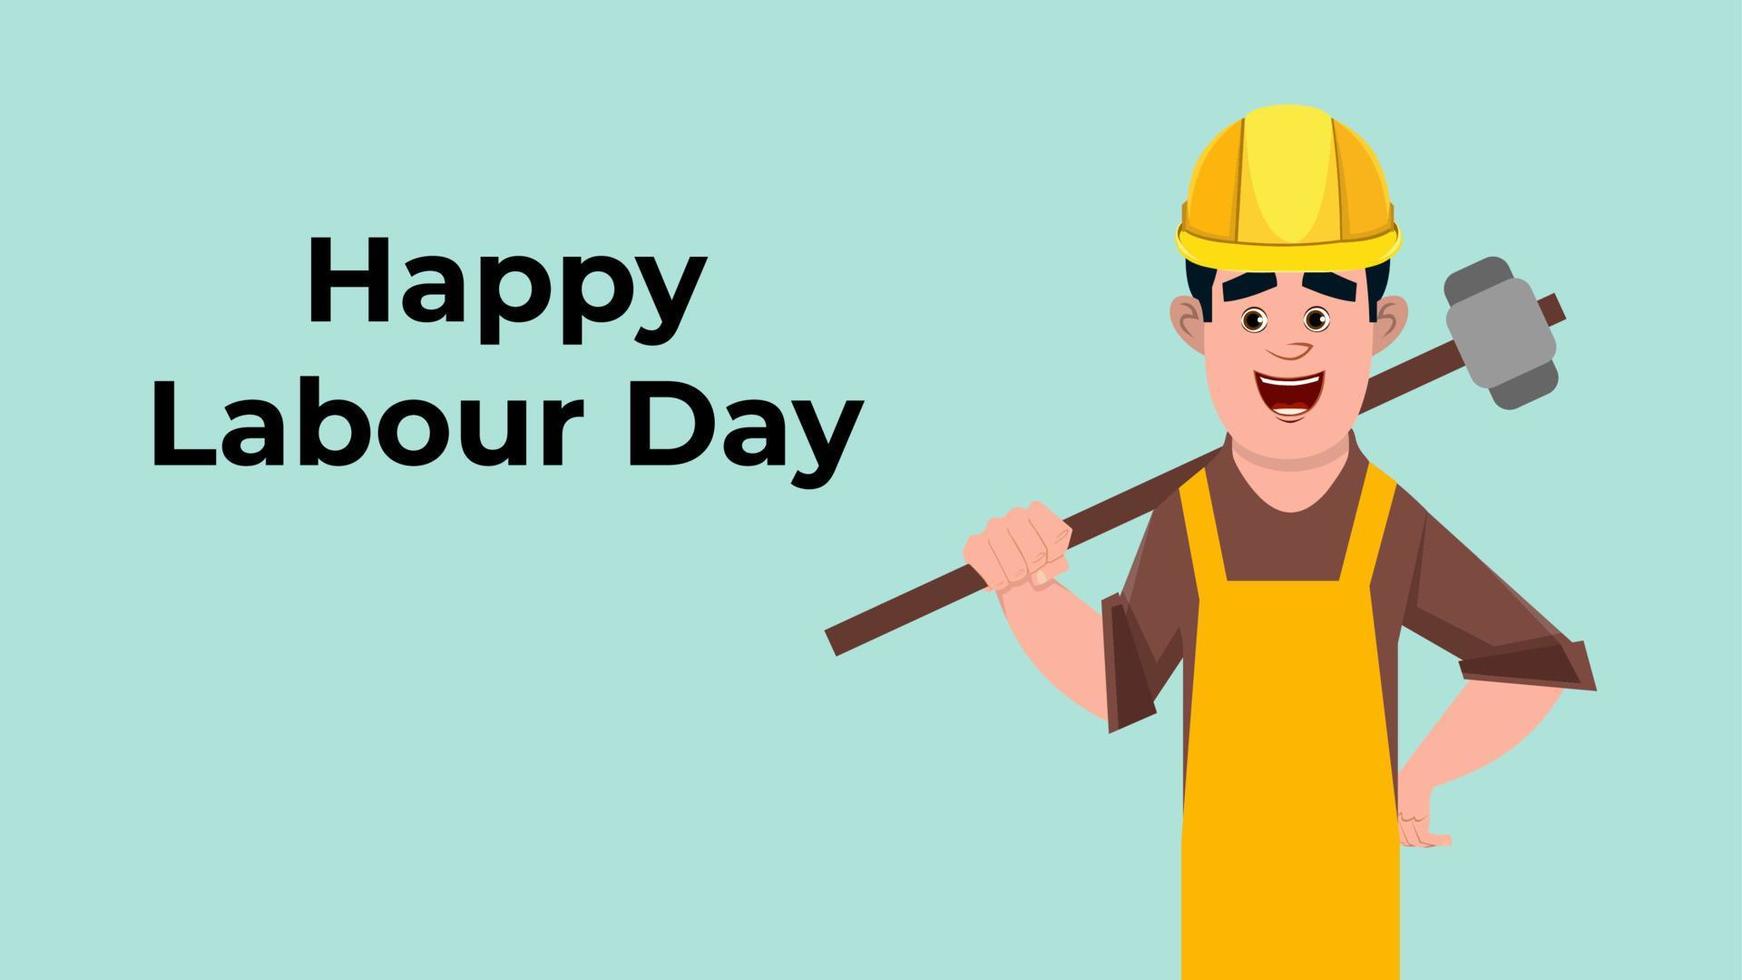 Happy labour day banner illustration vector